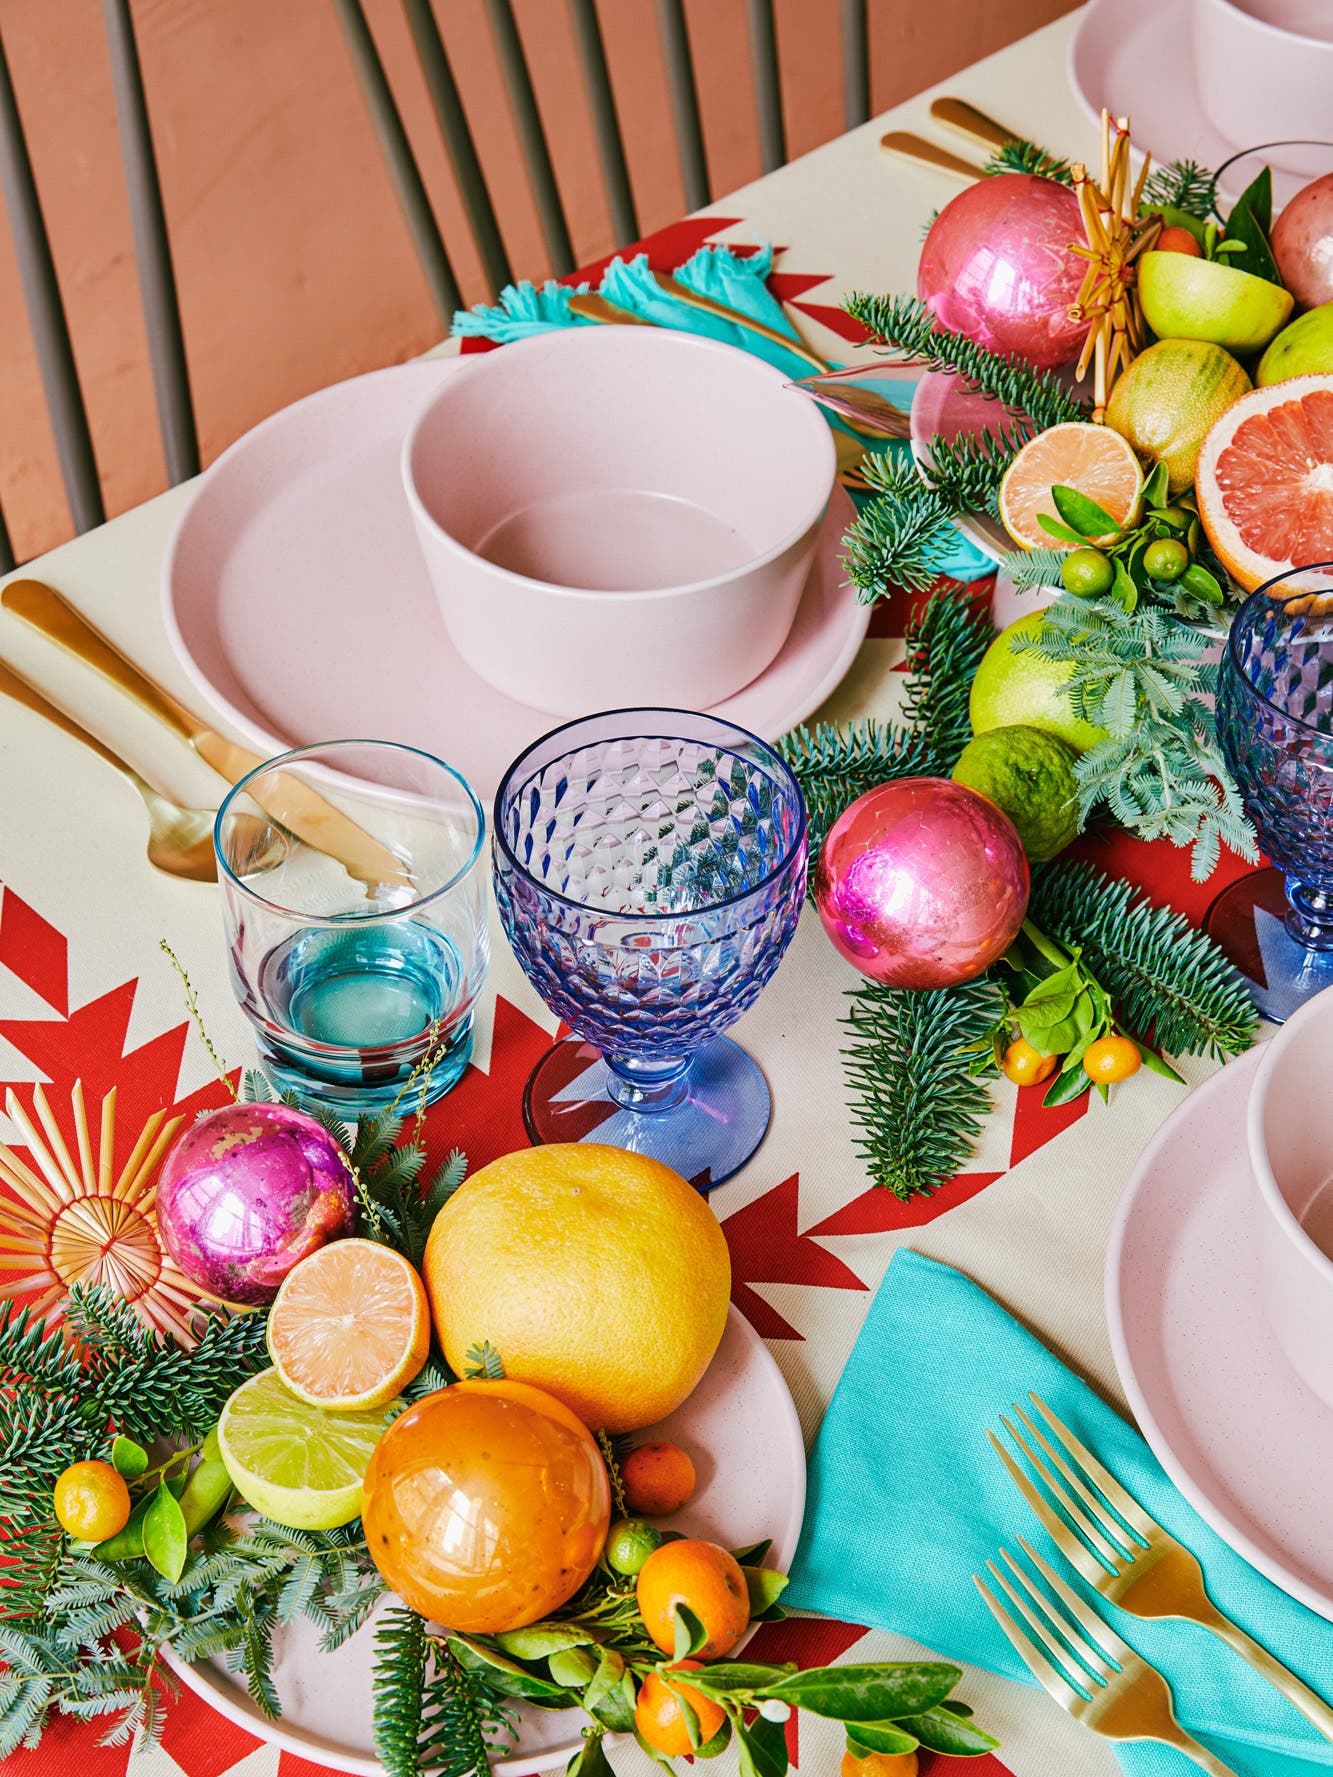 Our Executive Creative Director’s Holiday Table Skips the Red and Green Clichés